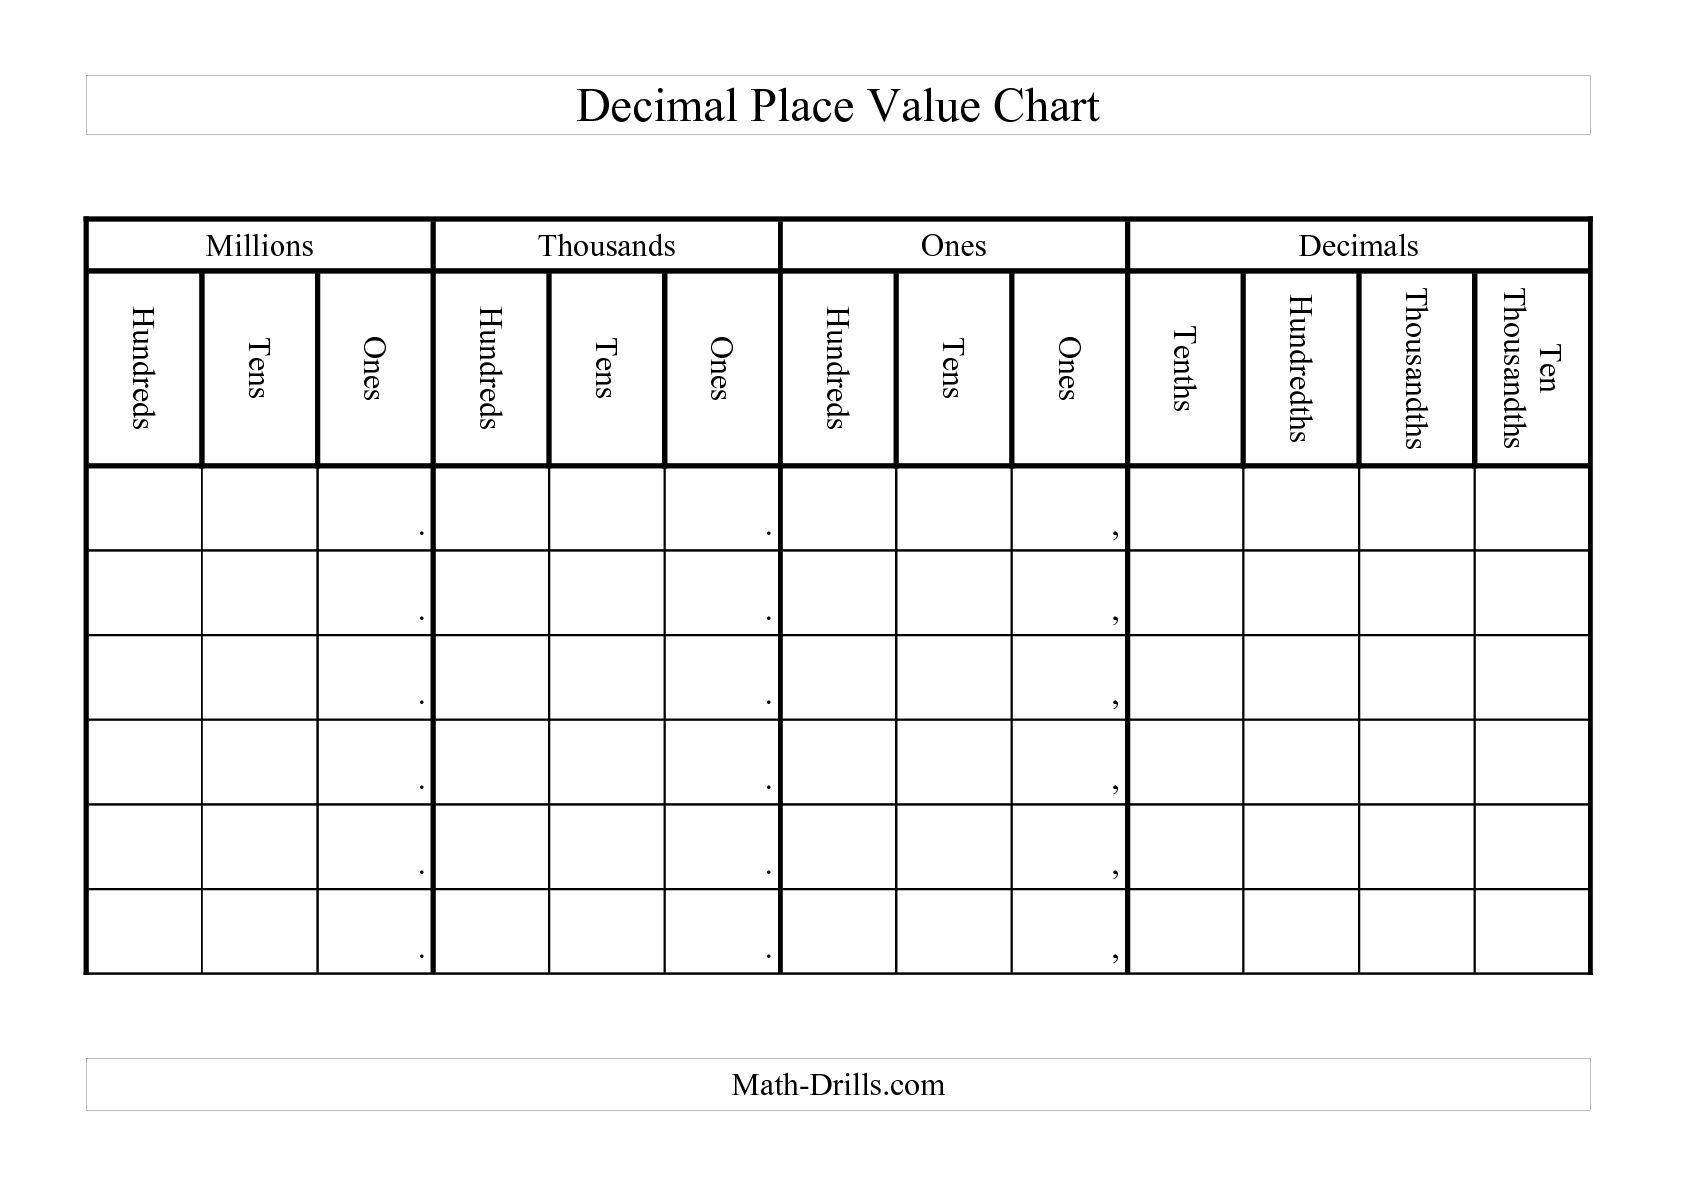 Place Value Chart with Decimals Image